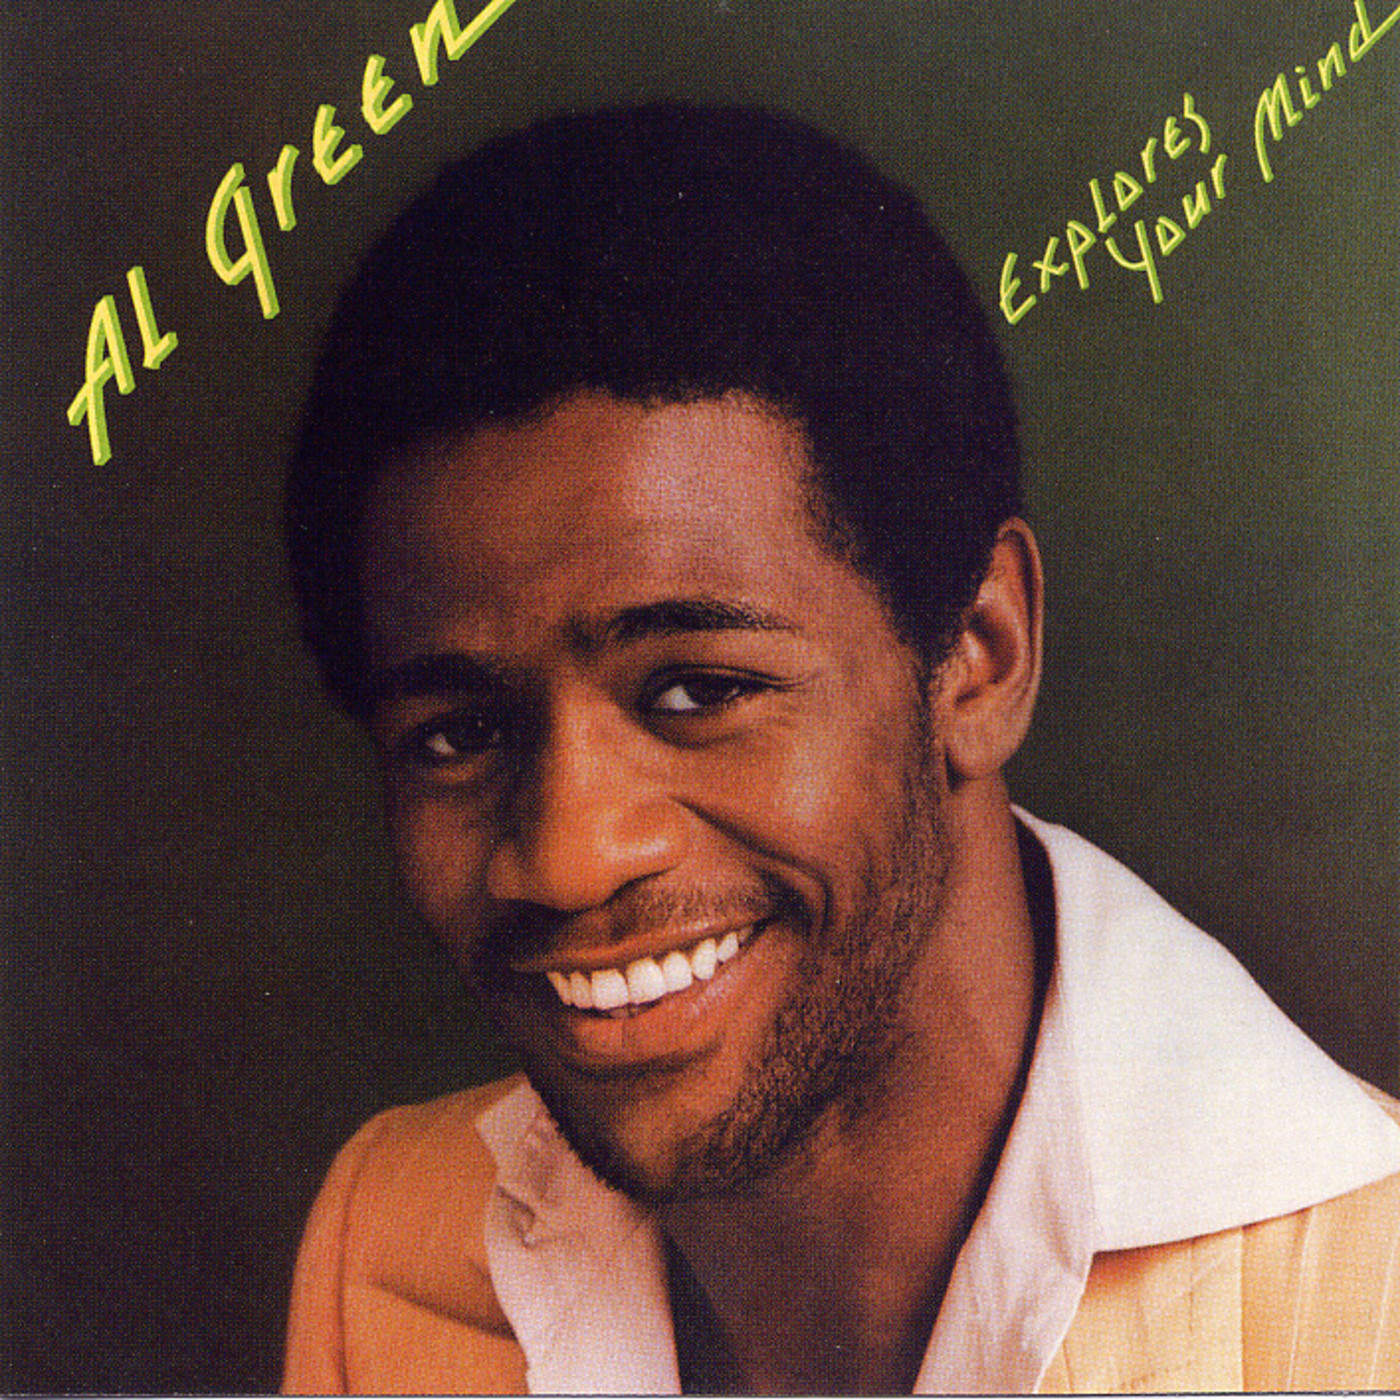 POSmusic background music streaming platform & bar music playlists - Al Green - Take Me To the River